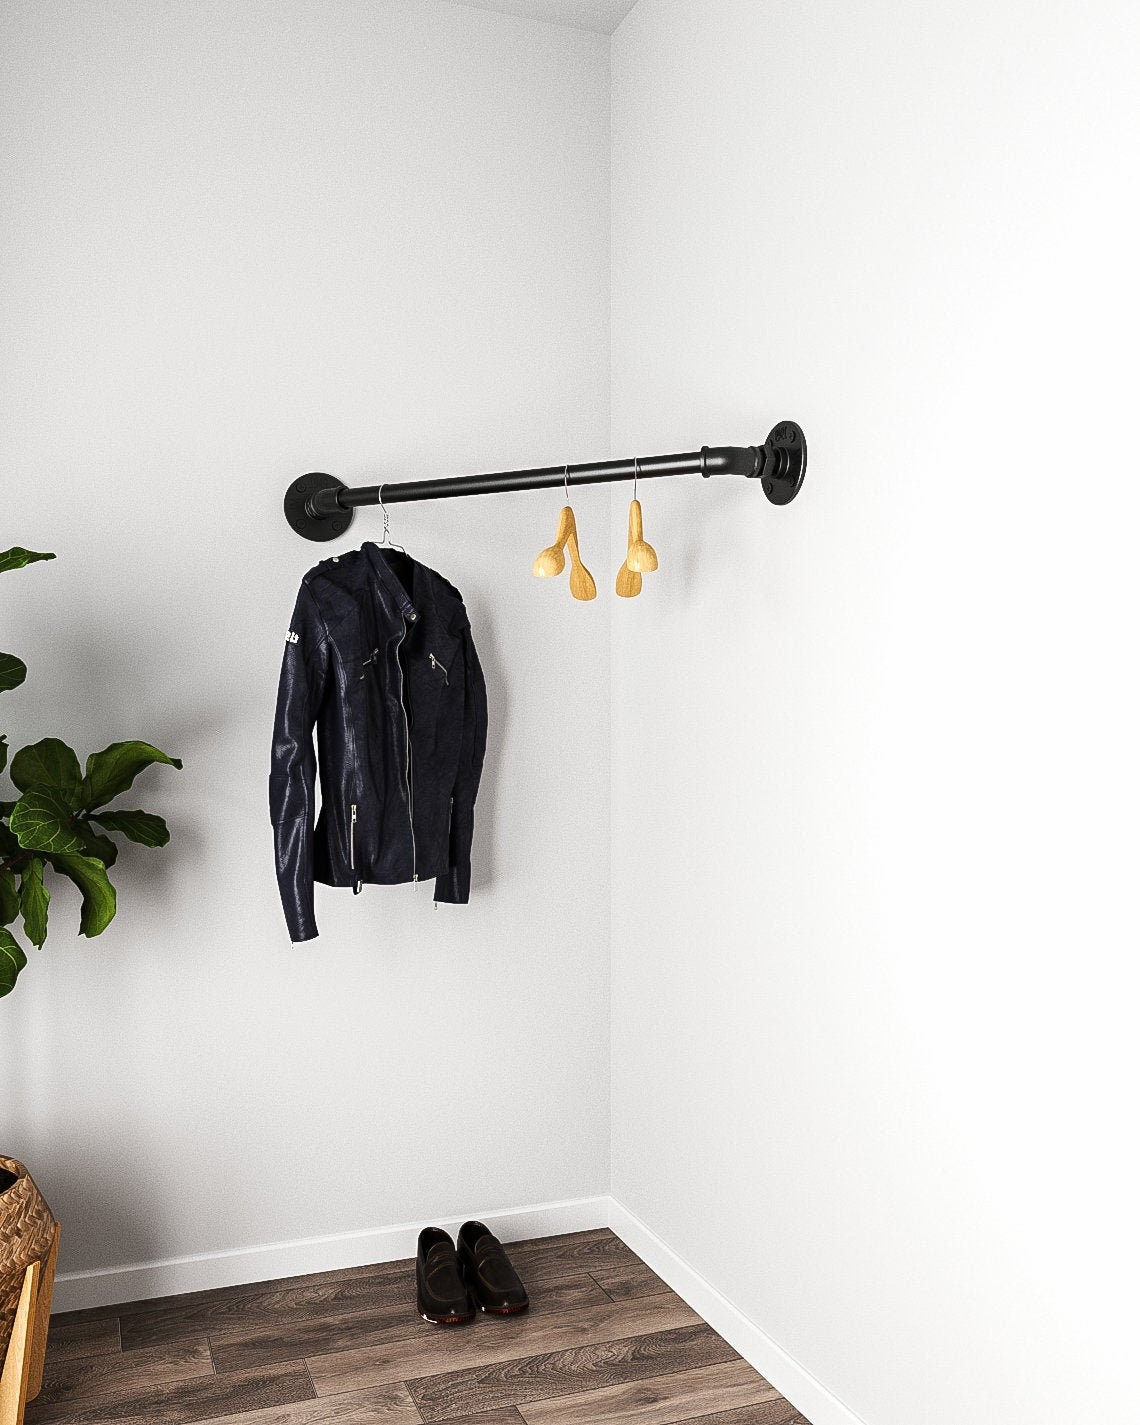 Amos Corner Industrial Pipe Wall Mounted Clothes Rack